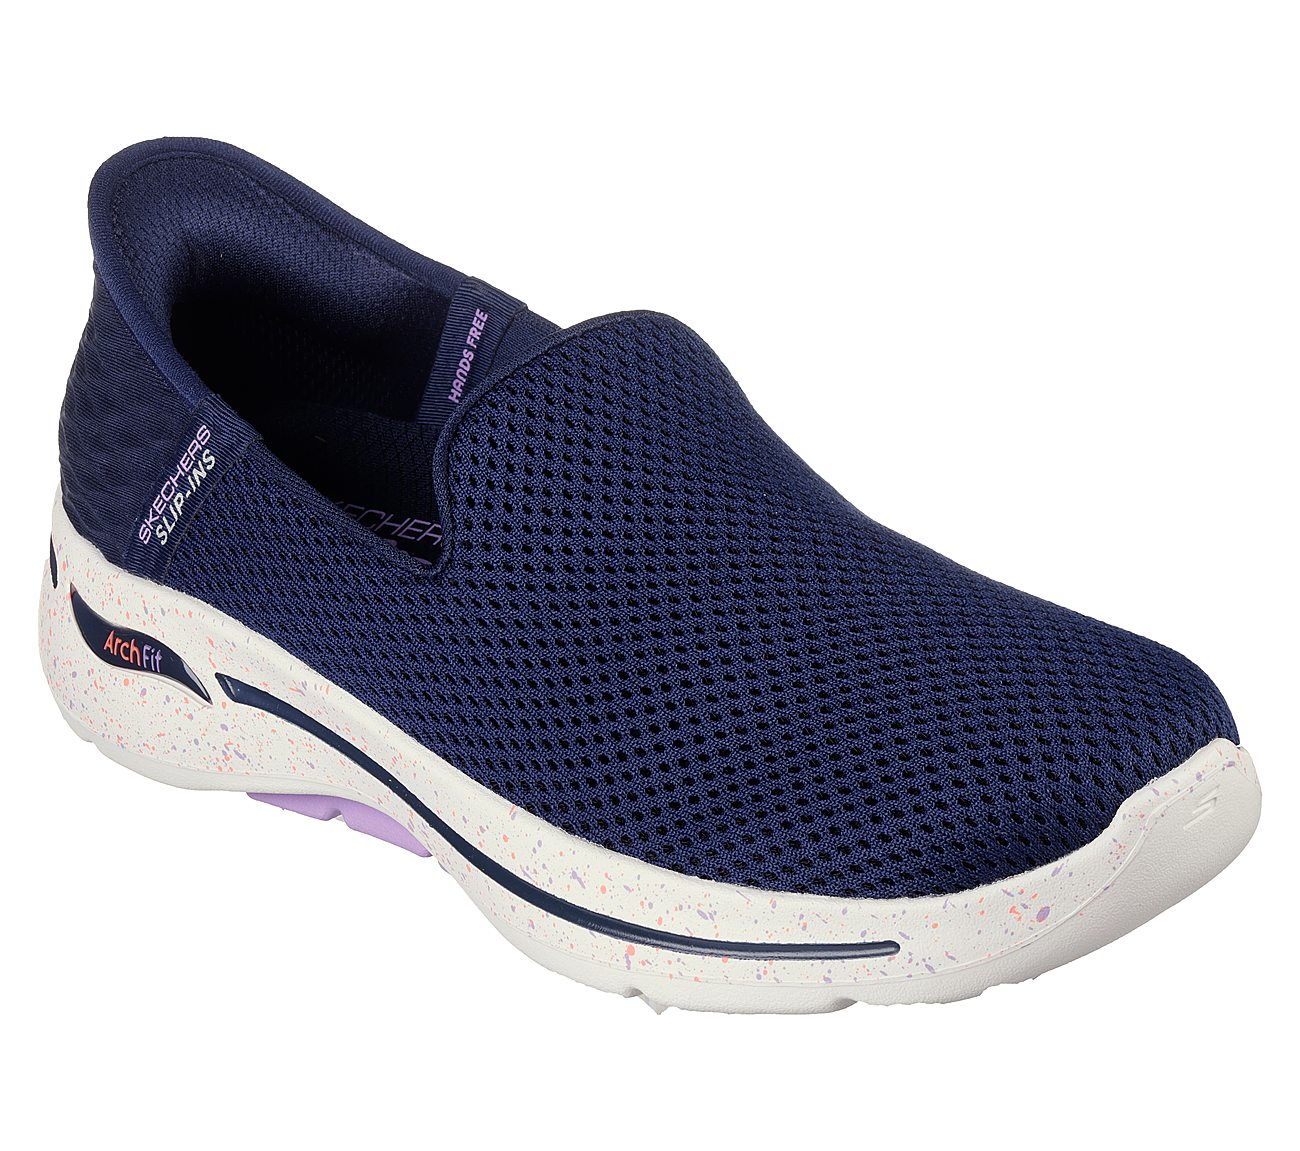 GO WALK ARCH FIT, NAVY/LAVENDER Footwear Right View